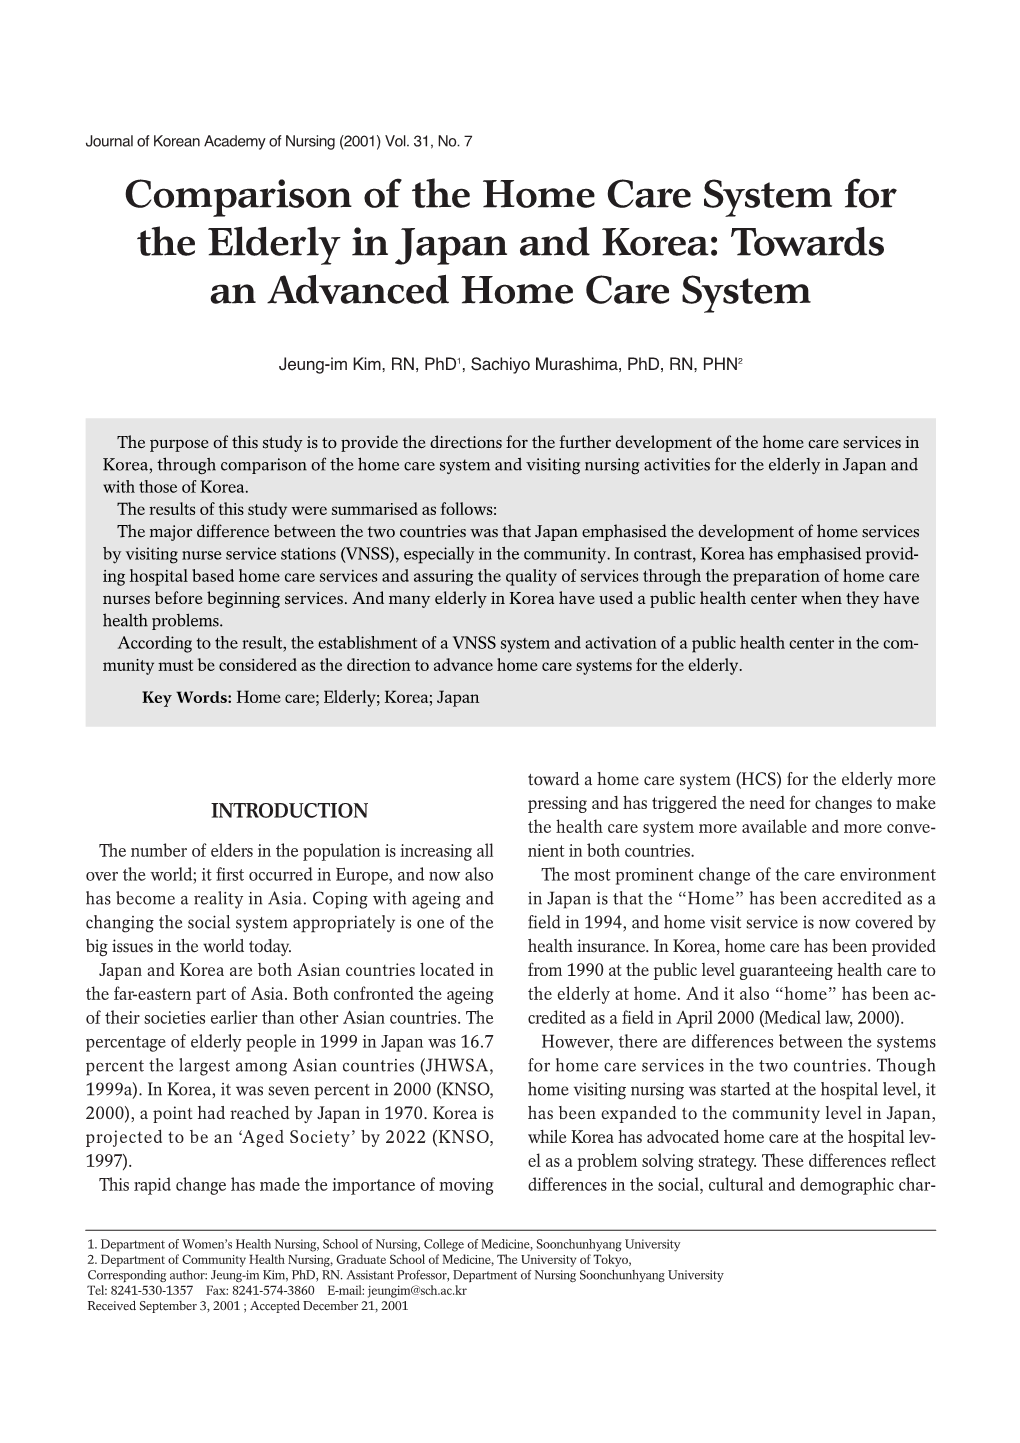 Comparison of the Home Care System for the Elderly in Japan and Korea: Towards an Advanced Home Care System